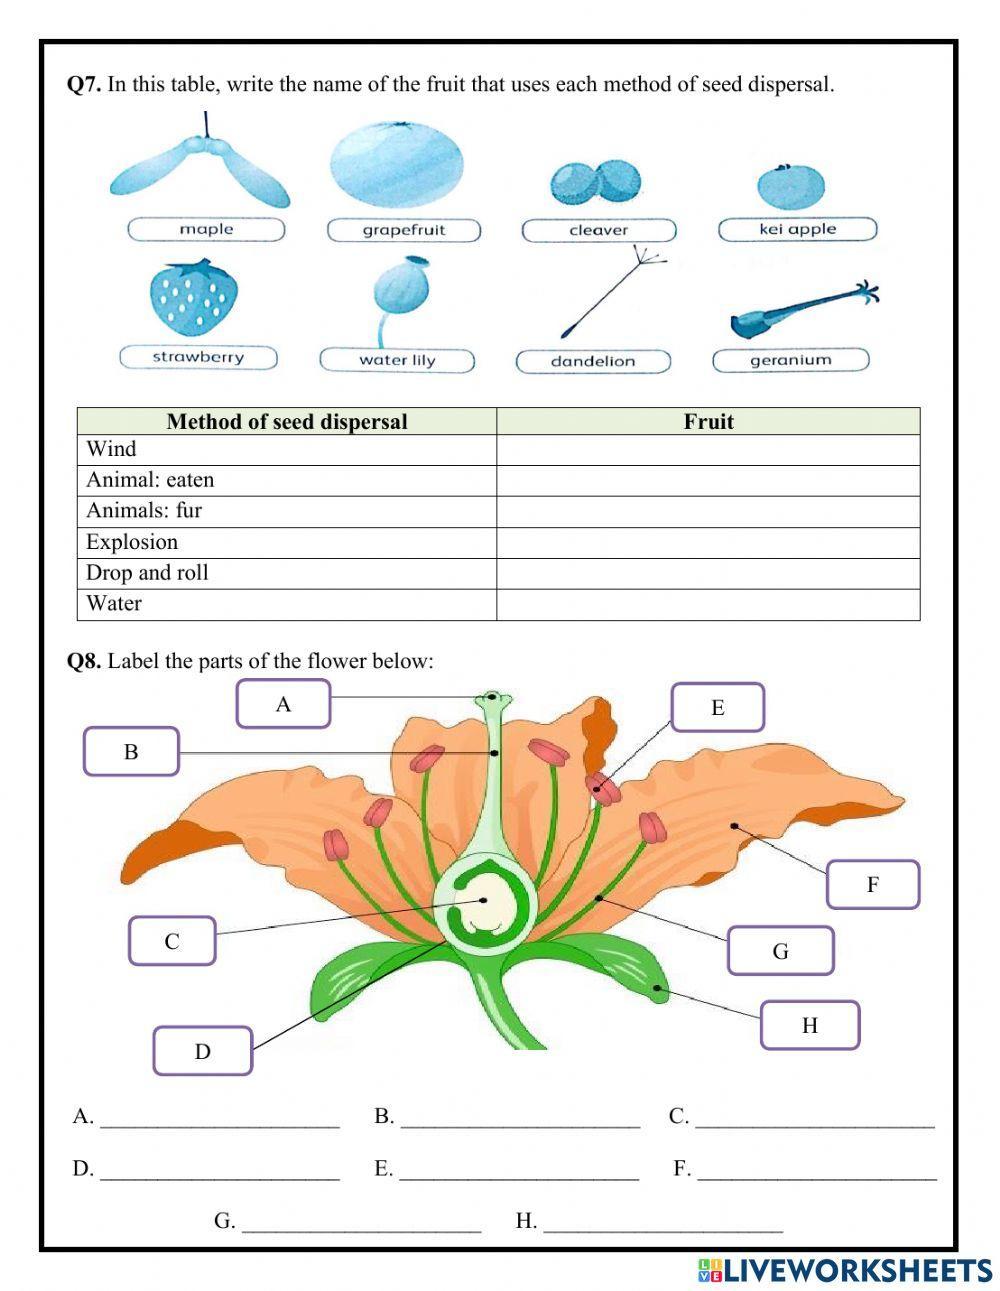 Unit 1 - Life cycle of a flowering plant